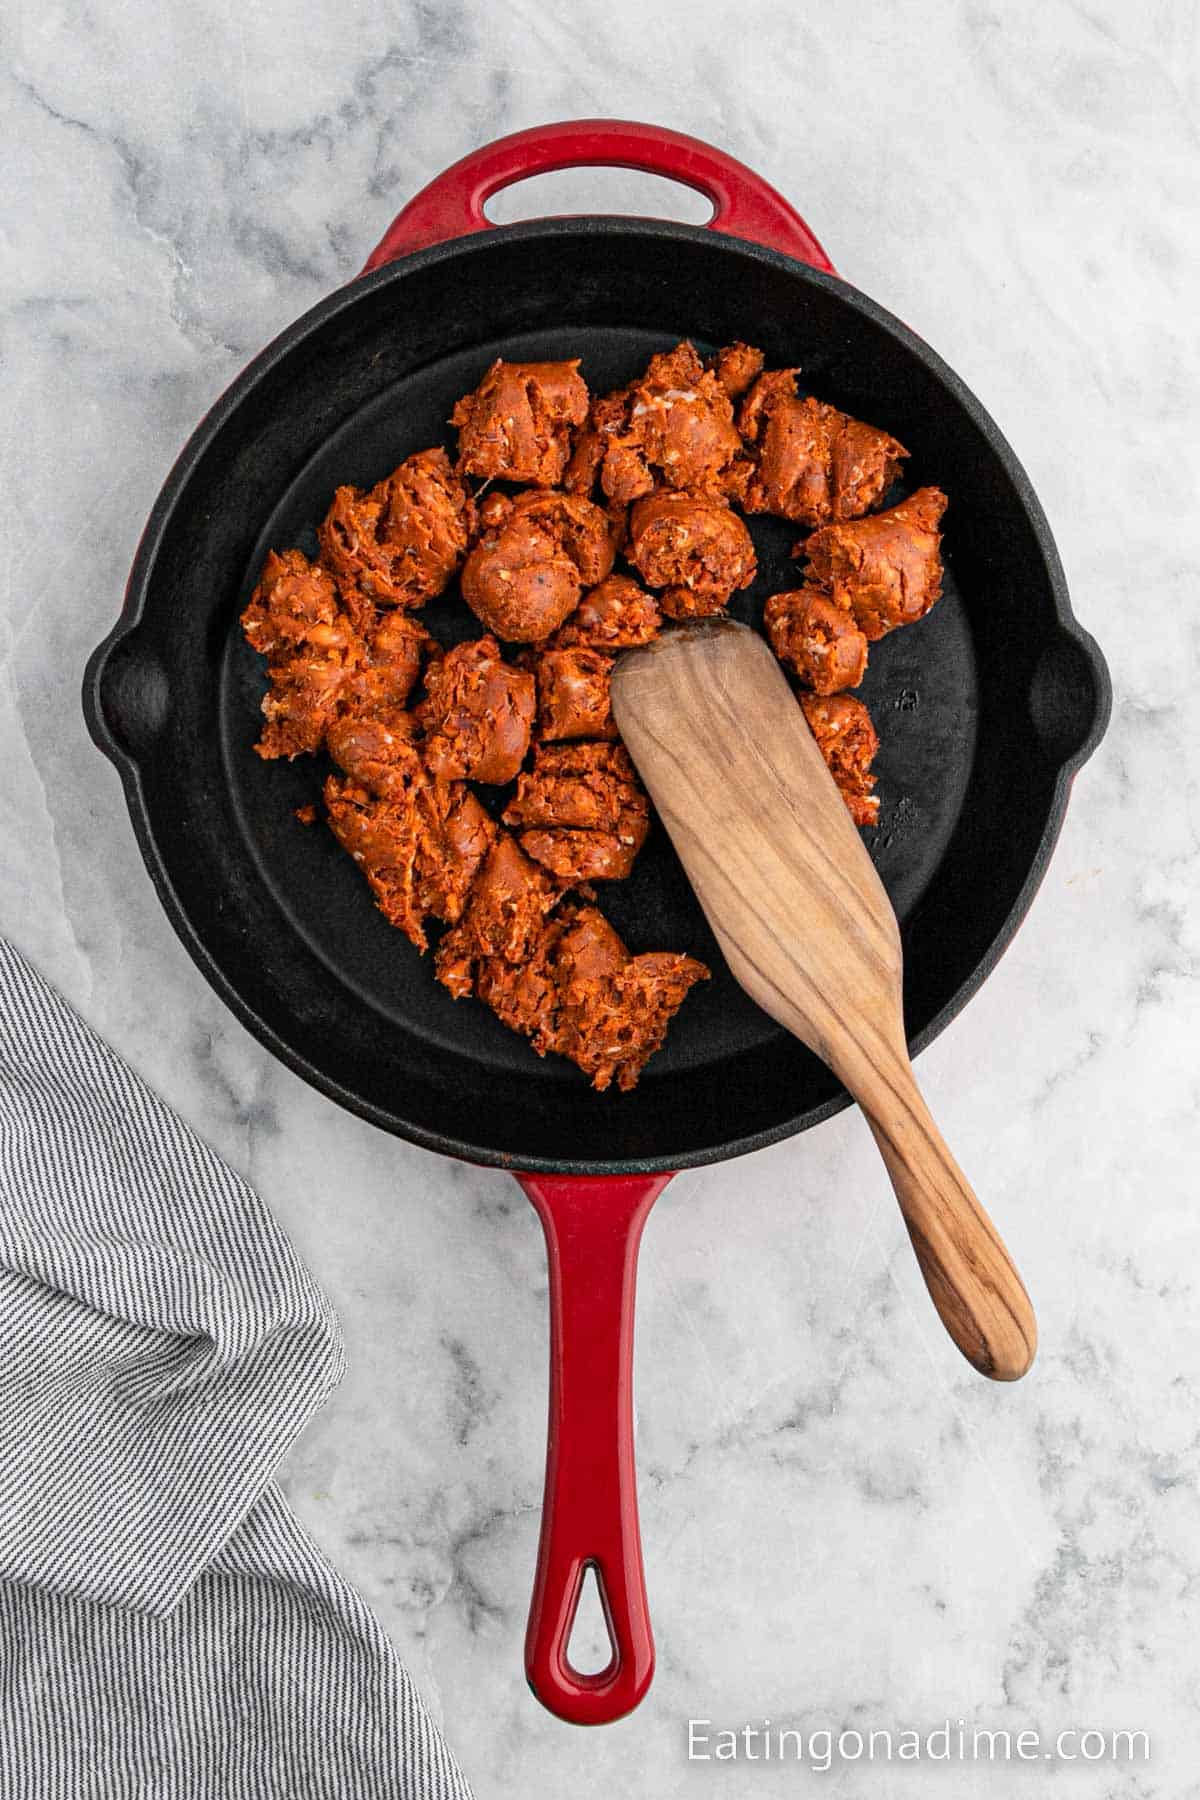 Cooking ground chorizo in a cast iron skillet with a wooden spoon